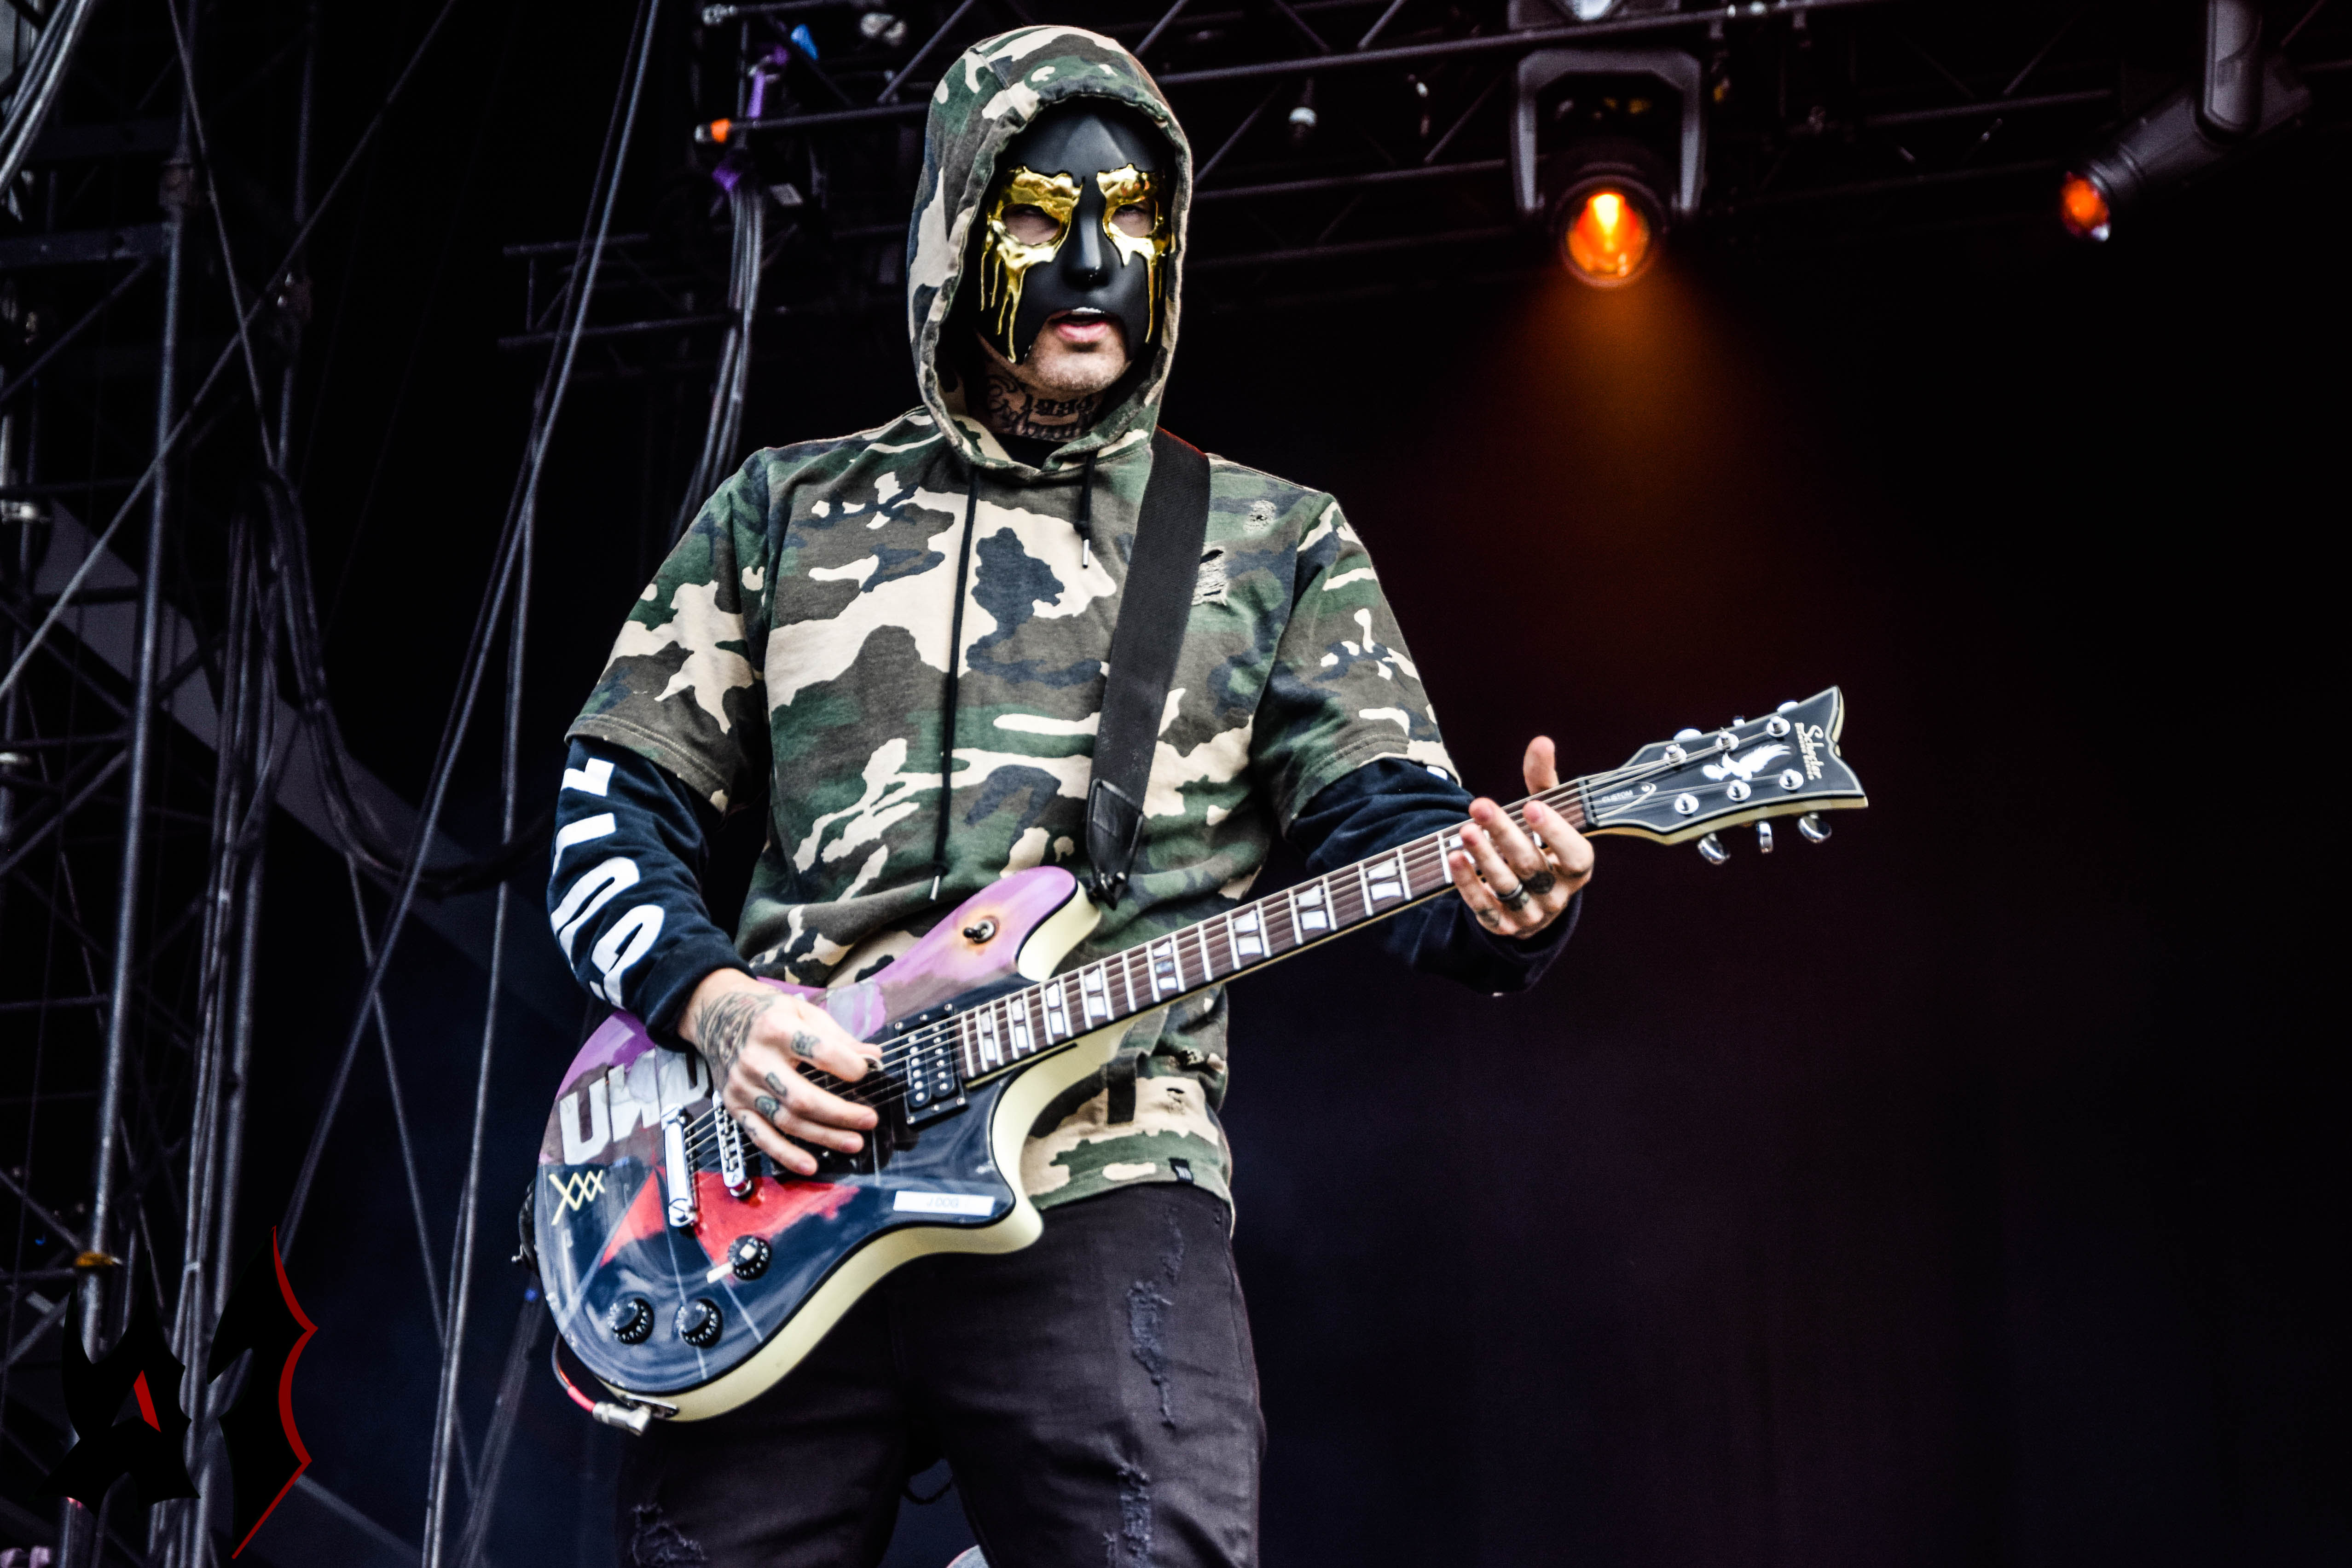 Donwload 2018 – Day 2 - Hollywood Undead 8